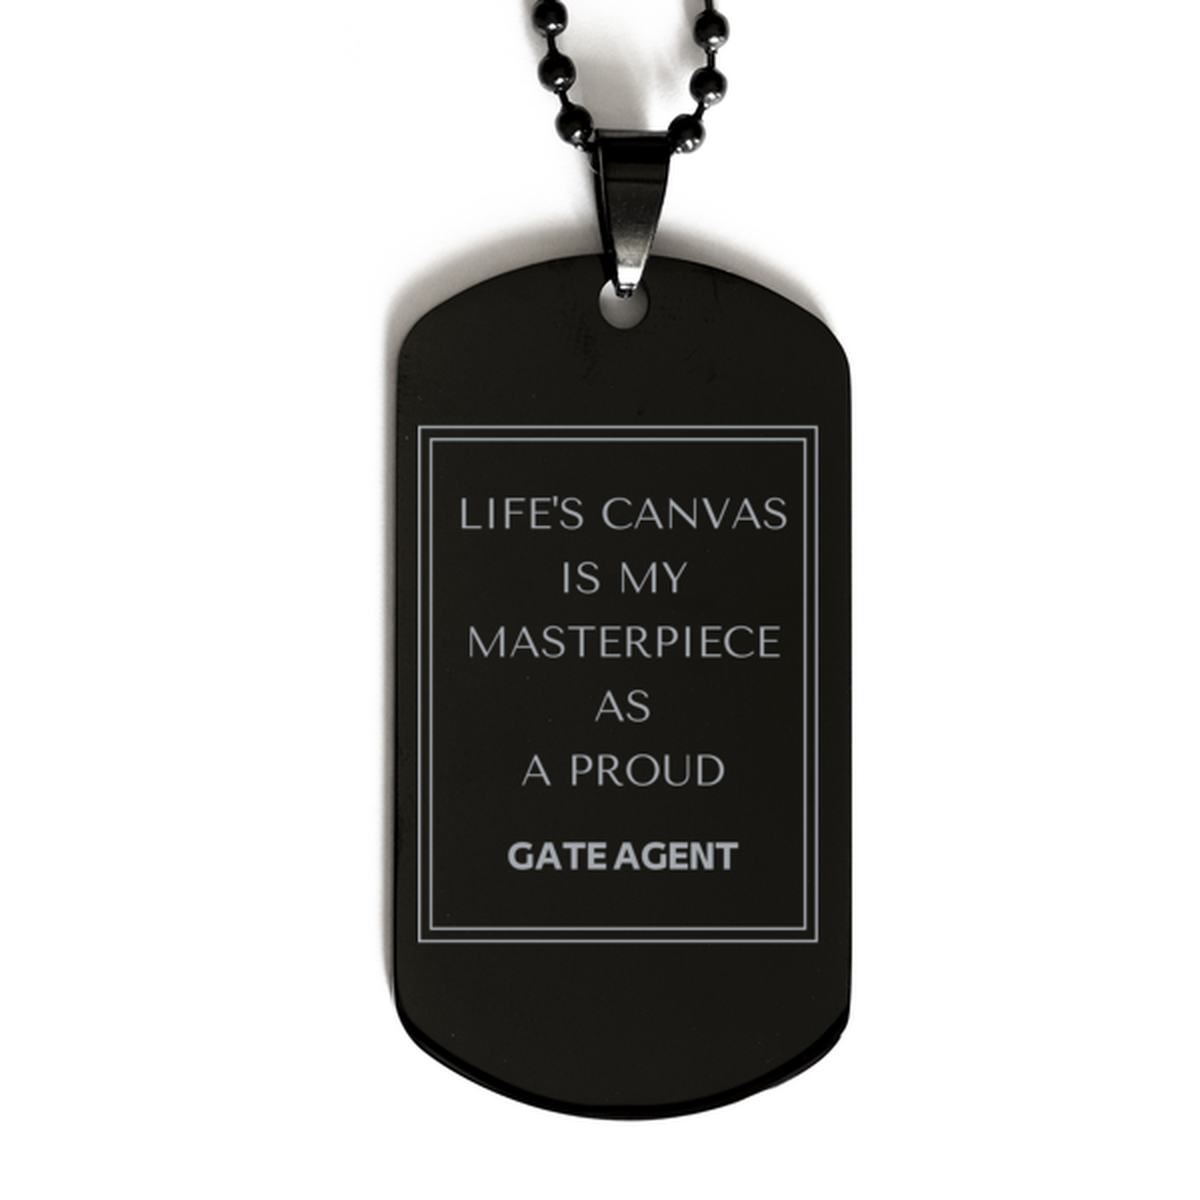 Proud Gate Agent Gifts, Life's canvas is my masterpiece, Epic Birthday Christmas Unique Black Dog Tag For Gate Agent, Coworkers, Men, Women, Friends